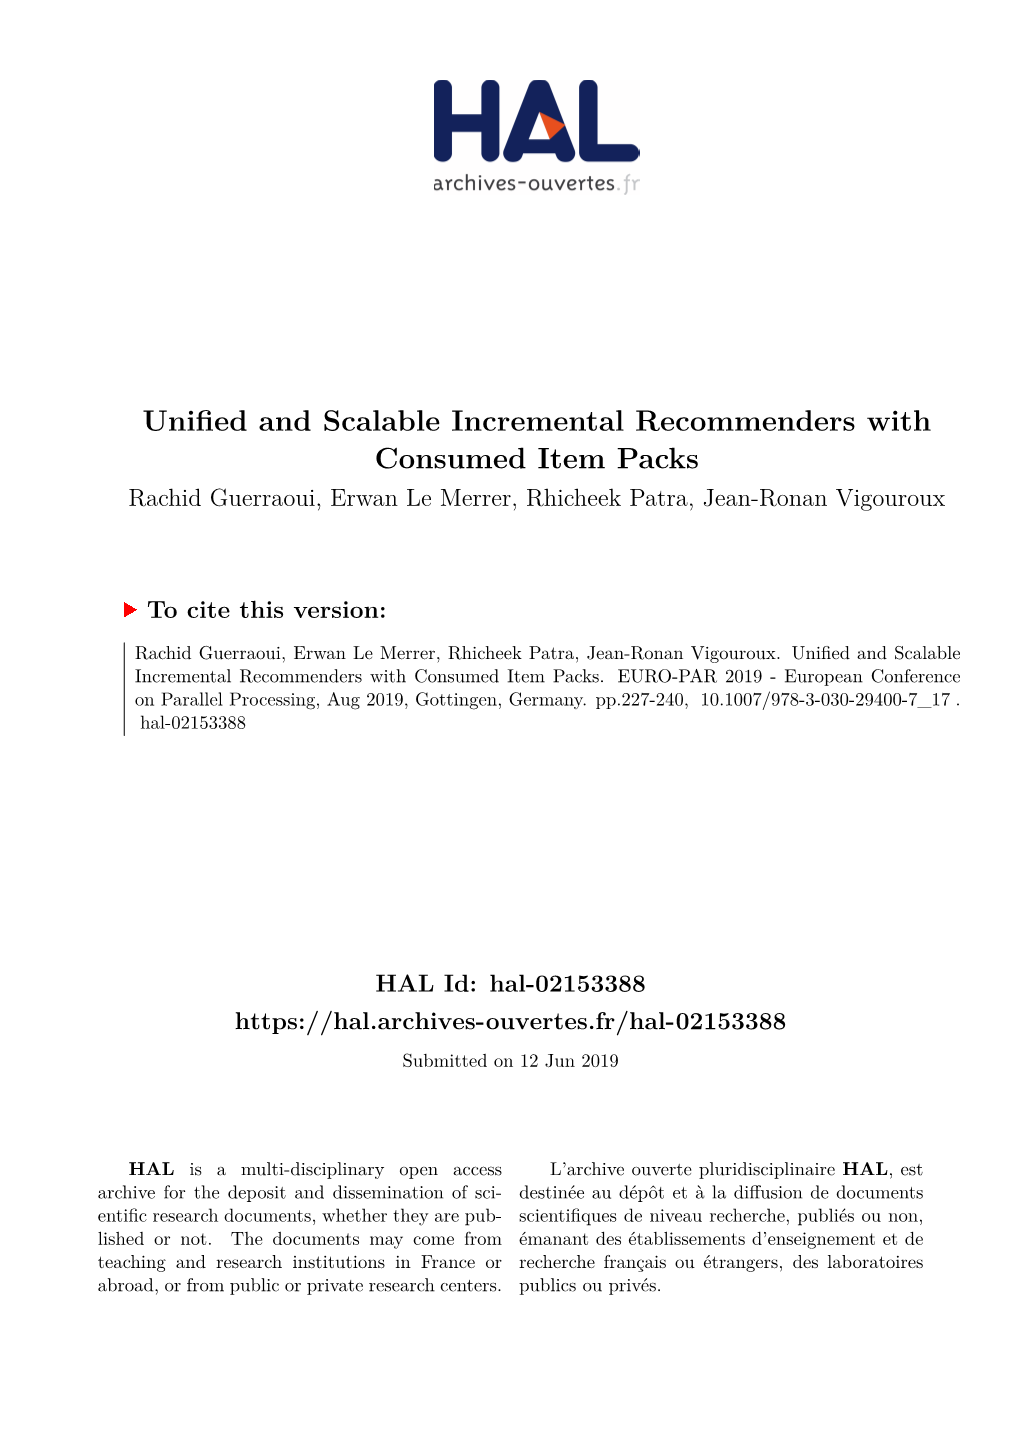 Unified and Scalable Incremental Recommenders with Consumed Item Packs Rachid Guerraoui, Erwan Le Merrer, Rhicheek Patra, Jean-Ronan Vigouroux